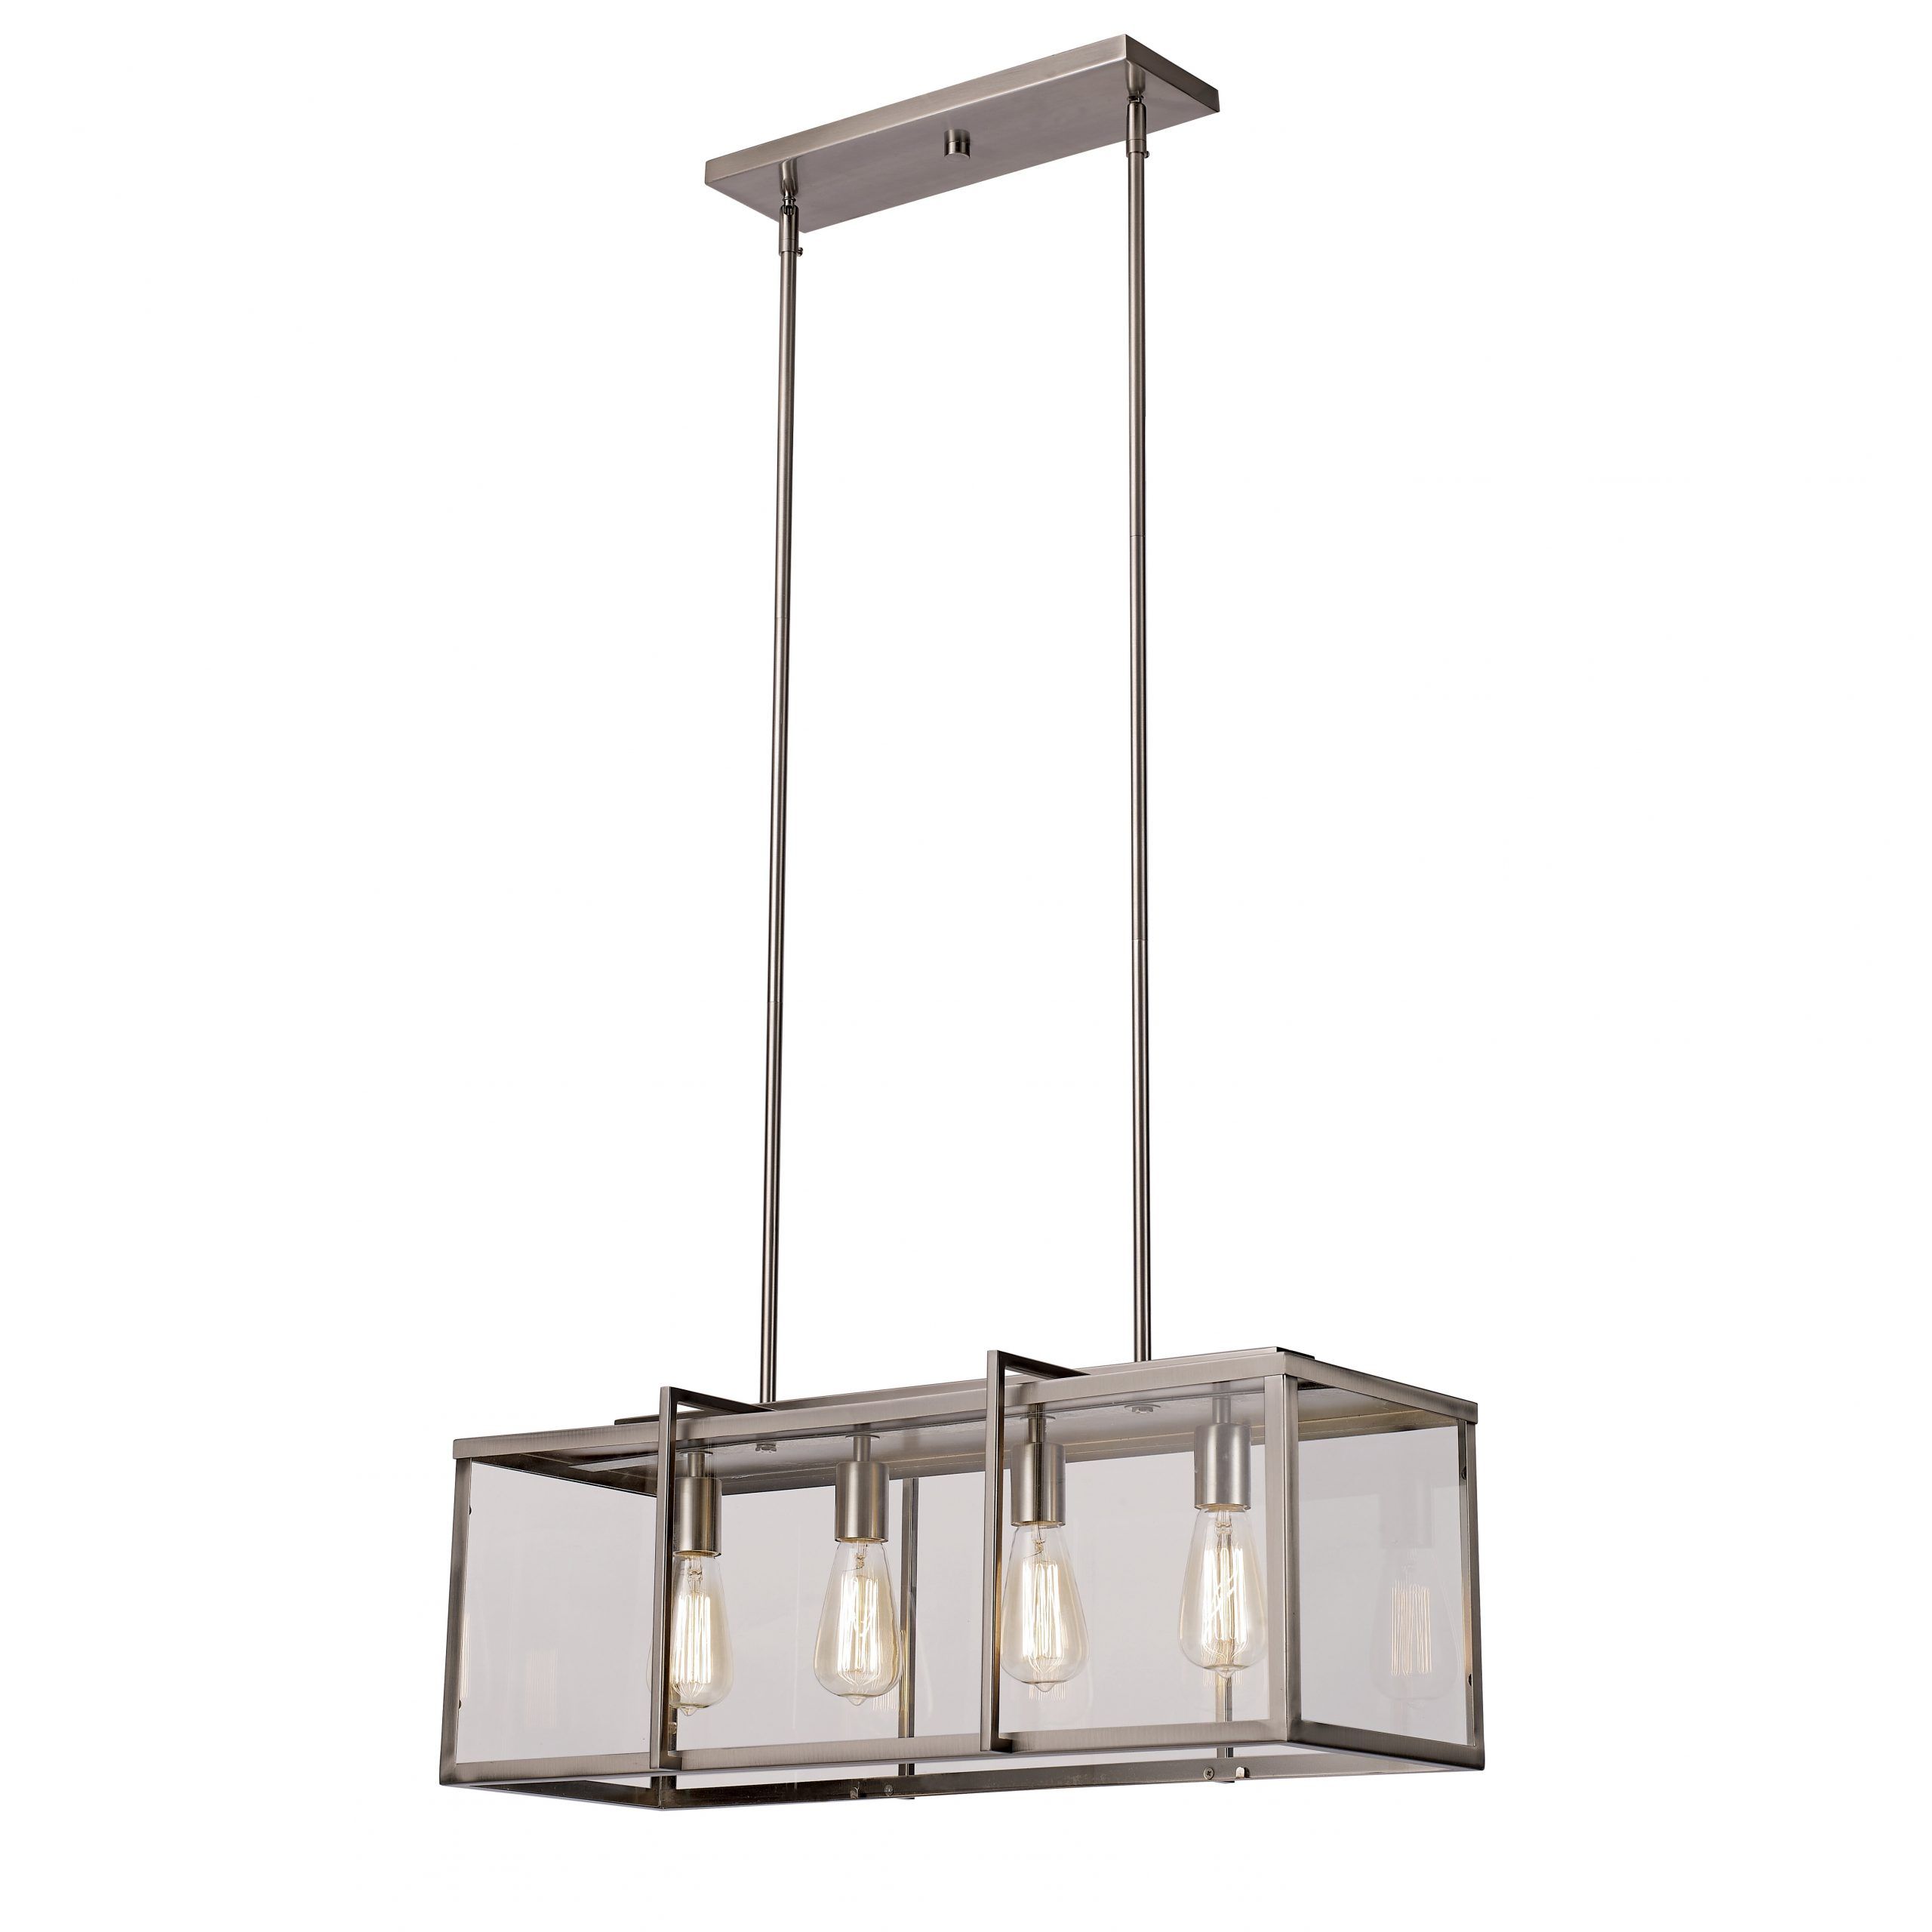 Transglobe Lighting Boxed 4 Light Kitchen Island Pendant Throughout Gray And Nickel Kitchen Island Light Pendants Lights (View 7 of 15)